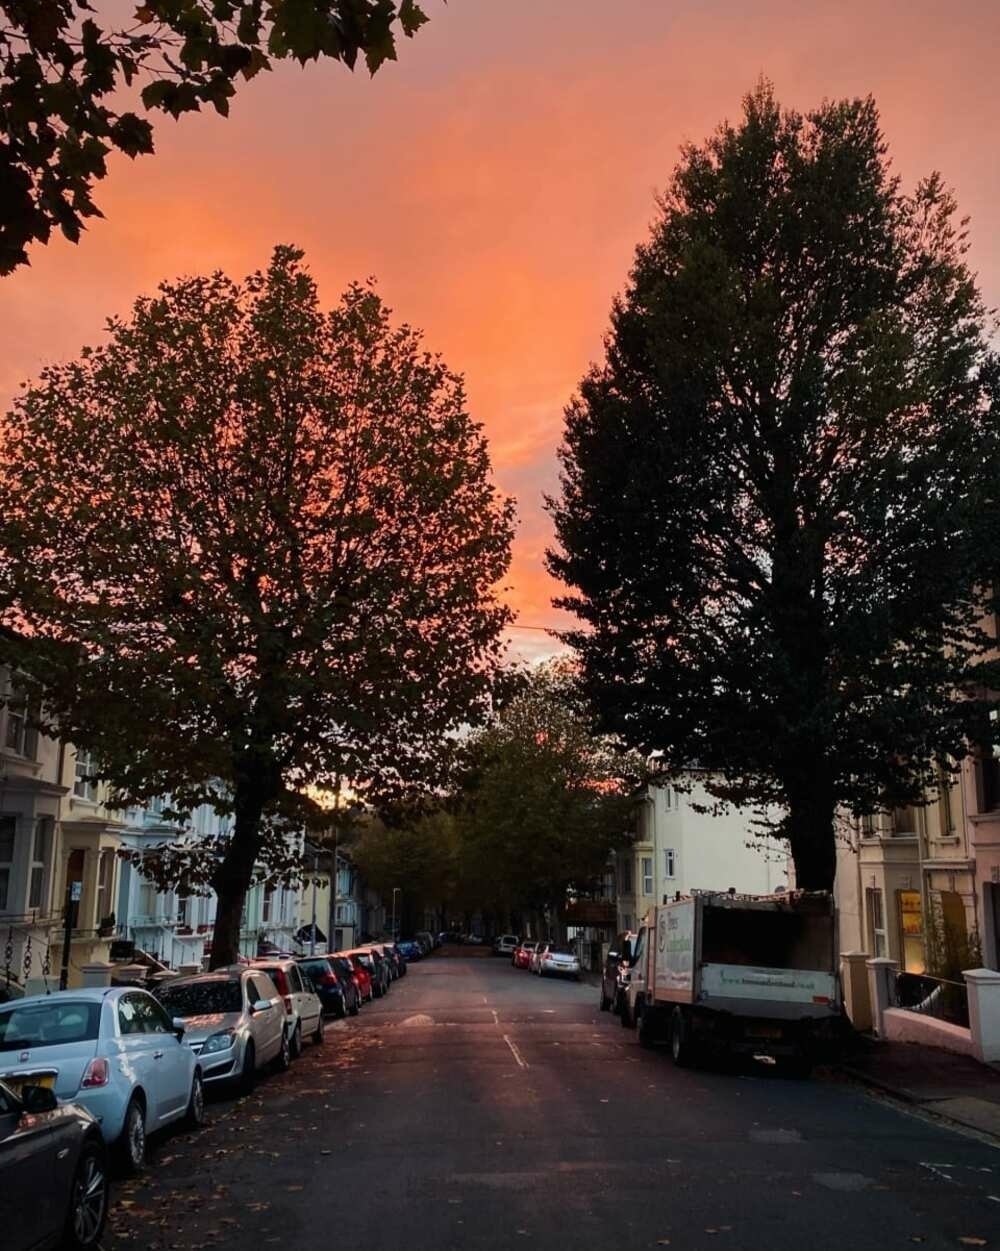 Redish sky over a leafy residential street.